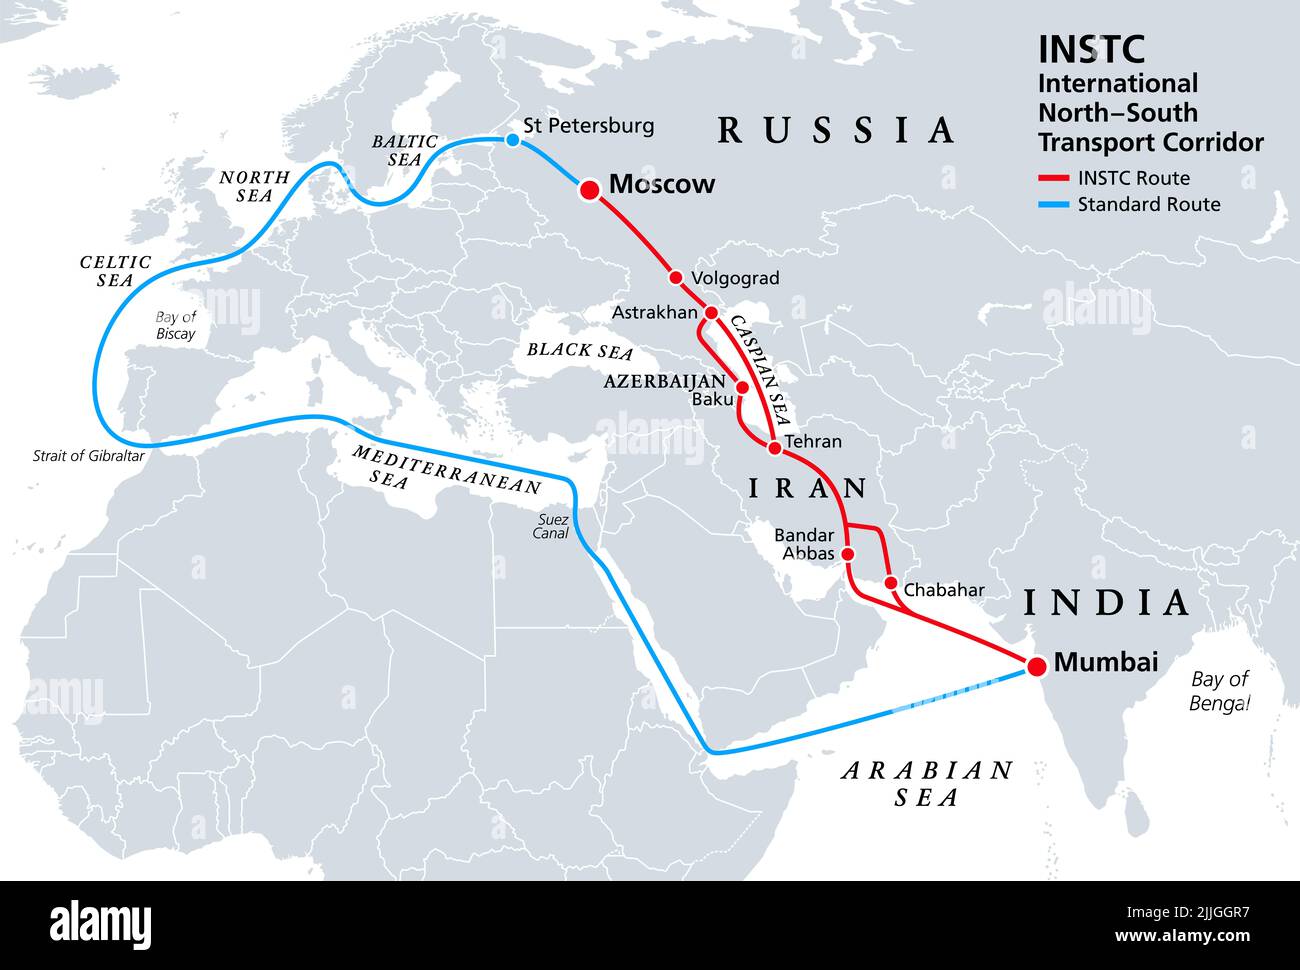 INSTC, International North–South Transport Corridor, political map. Network for moving freight, with Moscow as north end and Mumbai as south end. Stock Photo